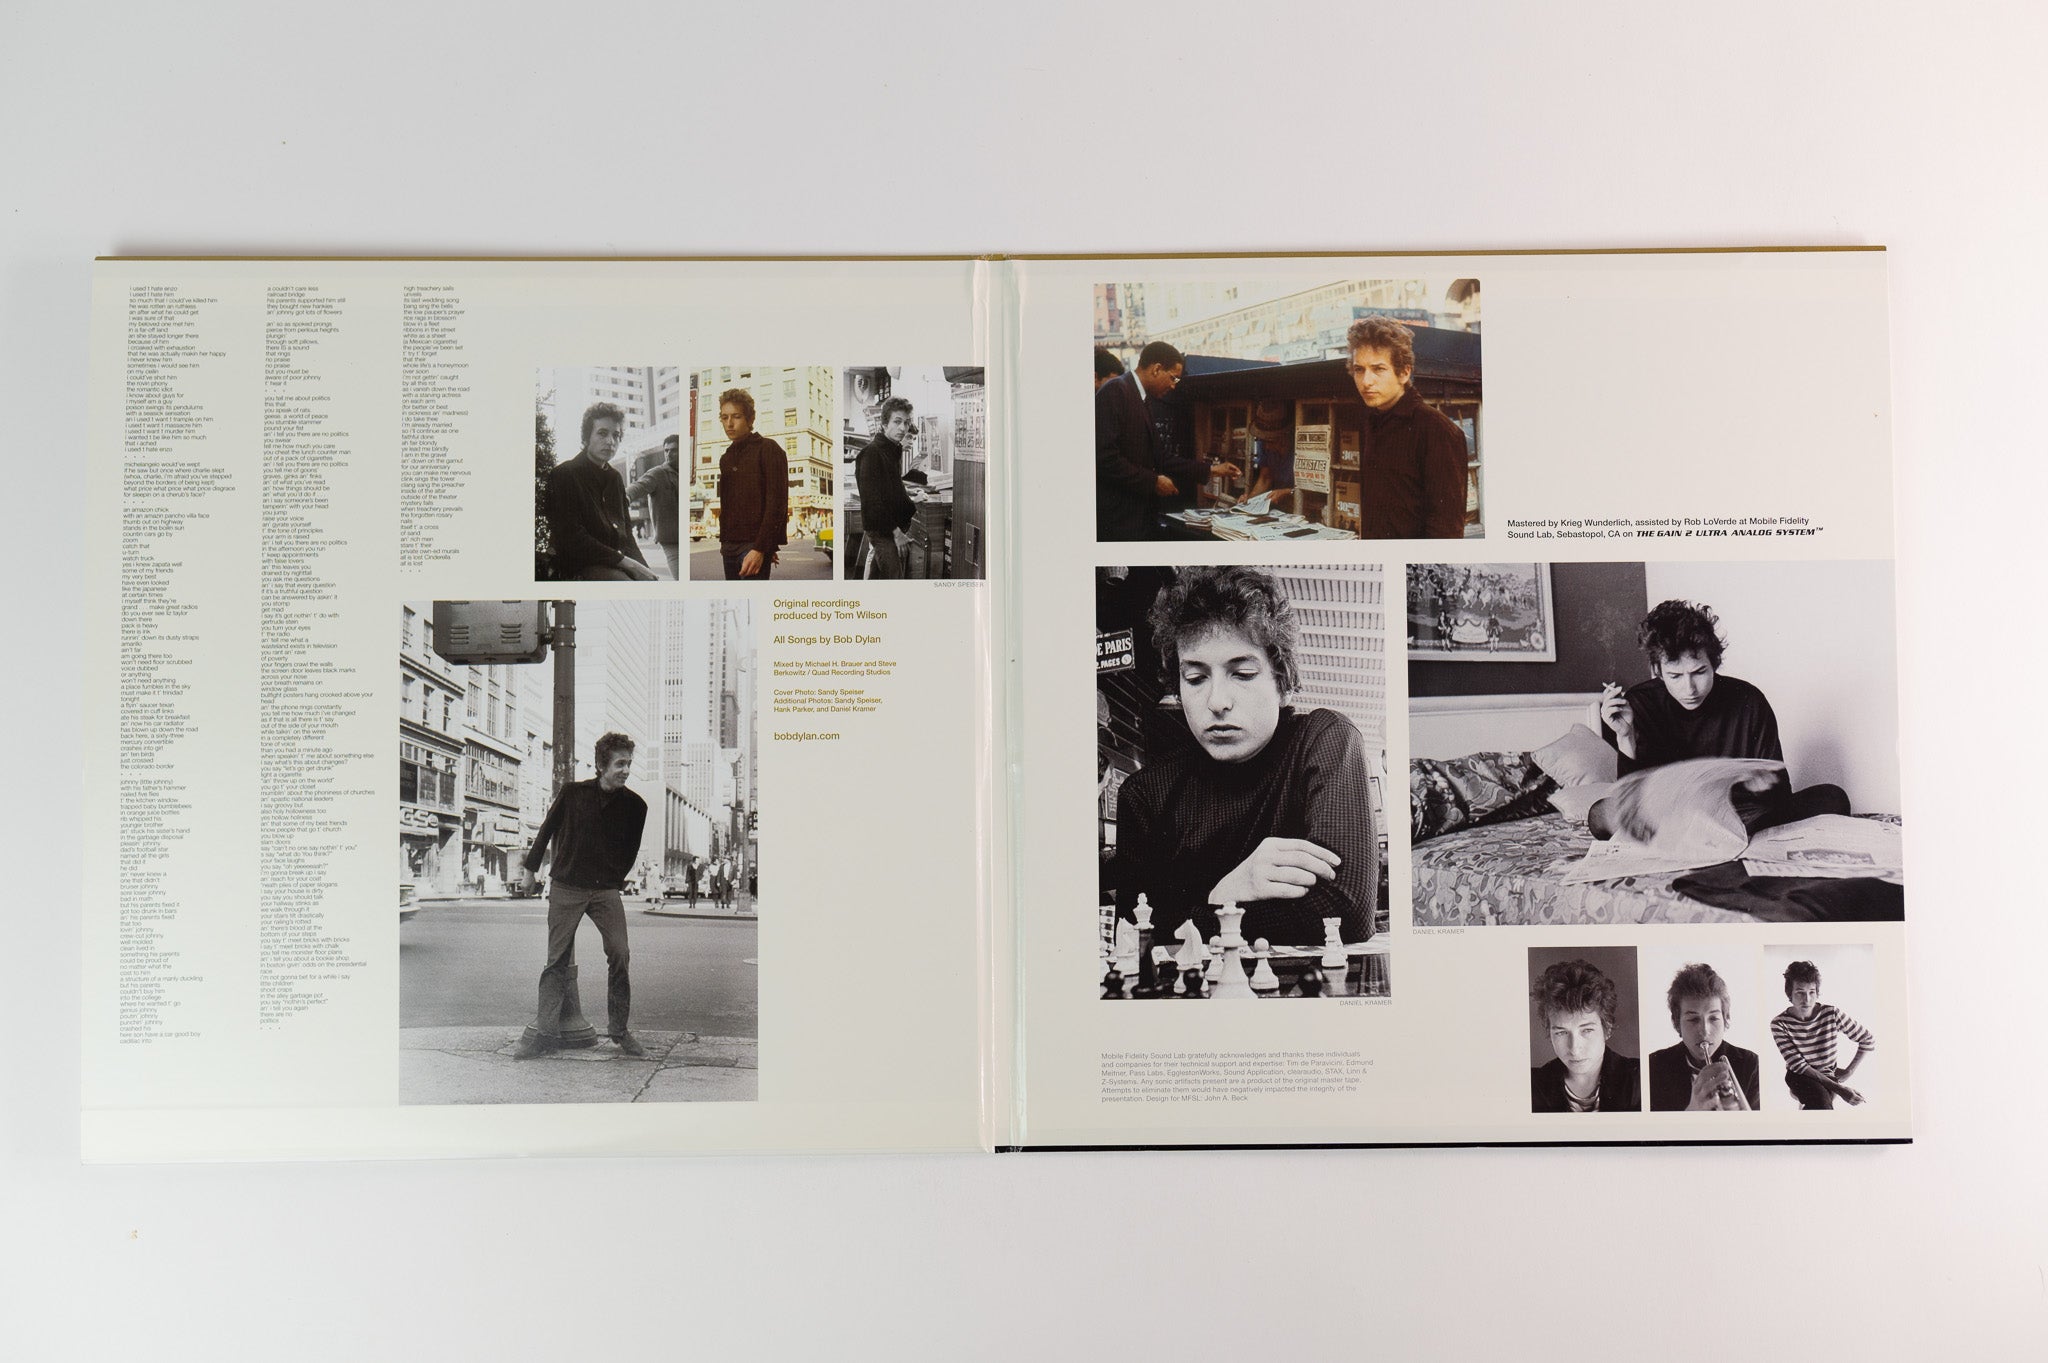 Bob Dylan - Another Side Of Bob Dylan Mobile Fidelity Sound Lab Stereo Reissue